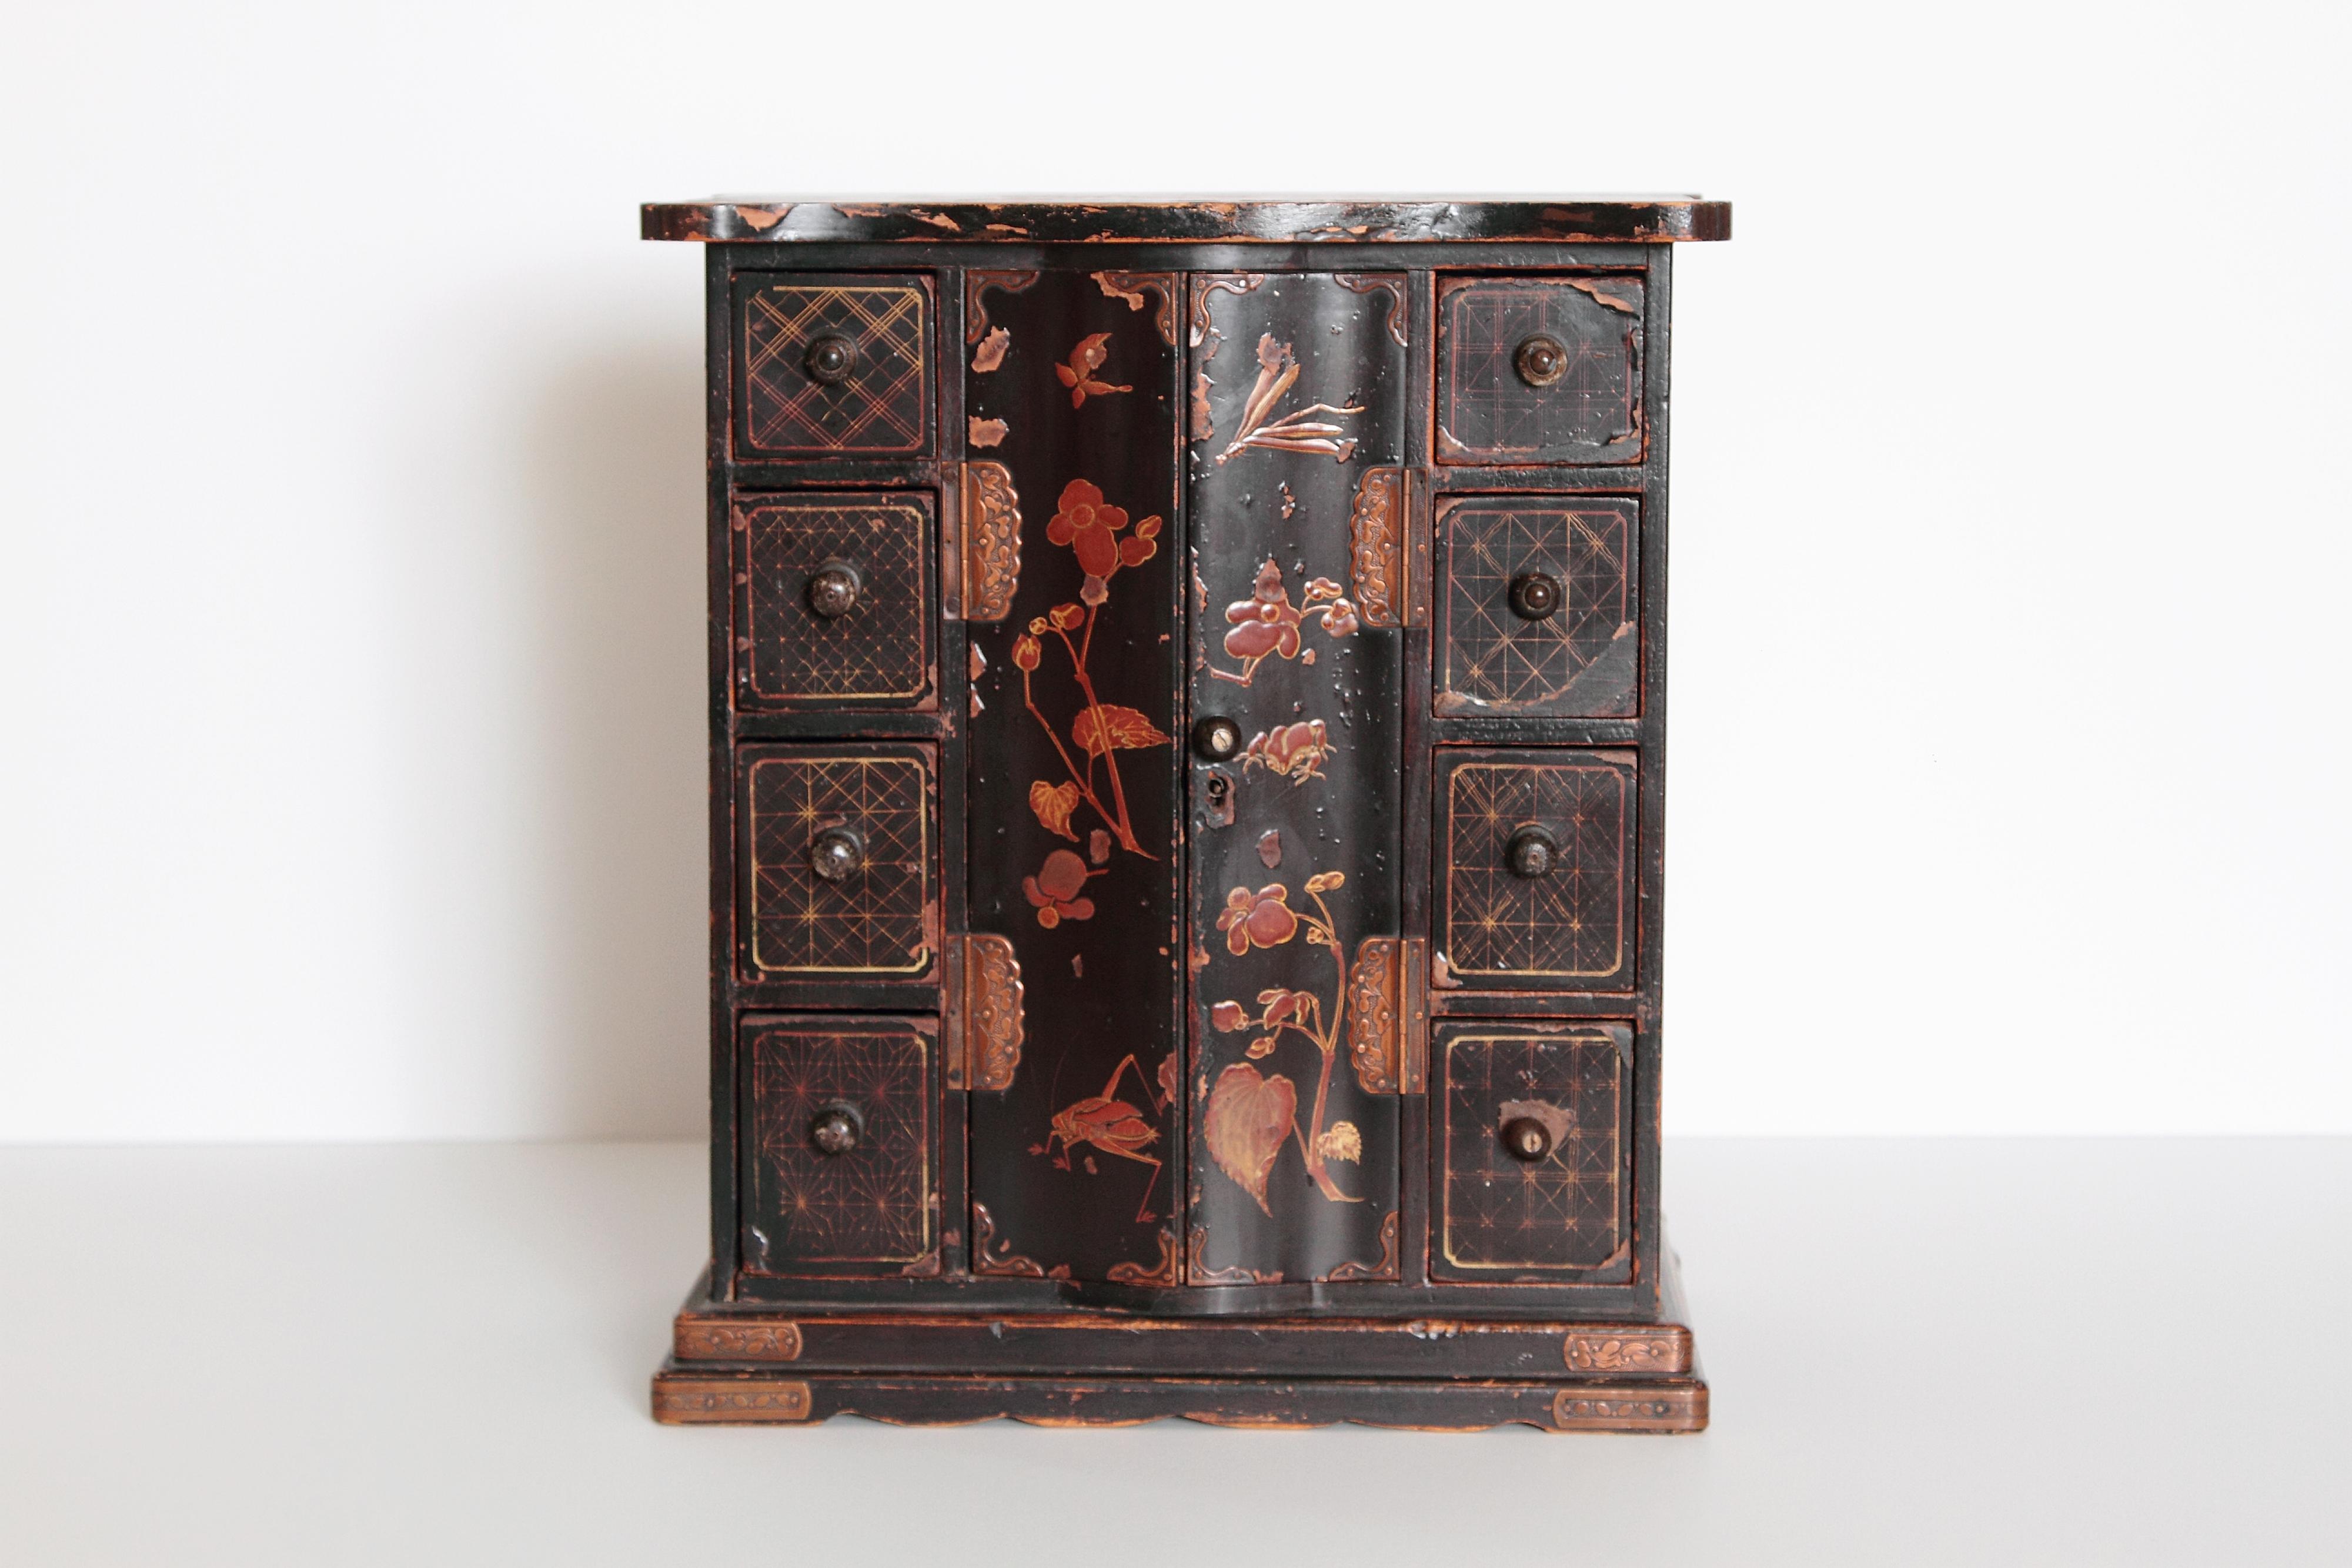 This early 20th century Japanese jewelry box is made of black lacquer and decorated with beautiful floral detailing. This piece still contains the original hardware and shows wear consistent with its age.